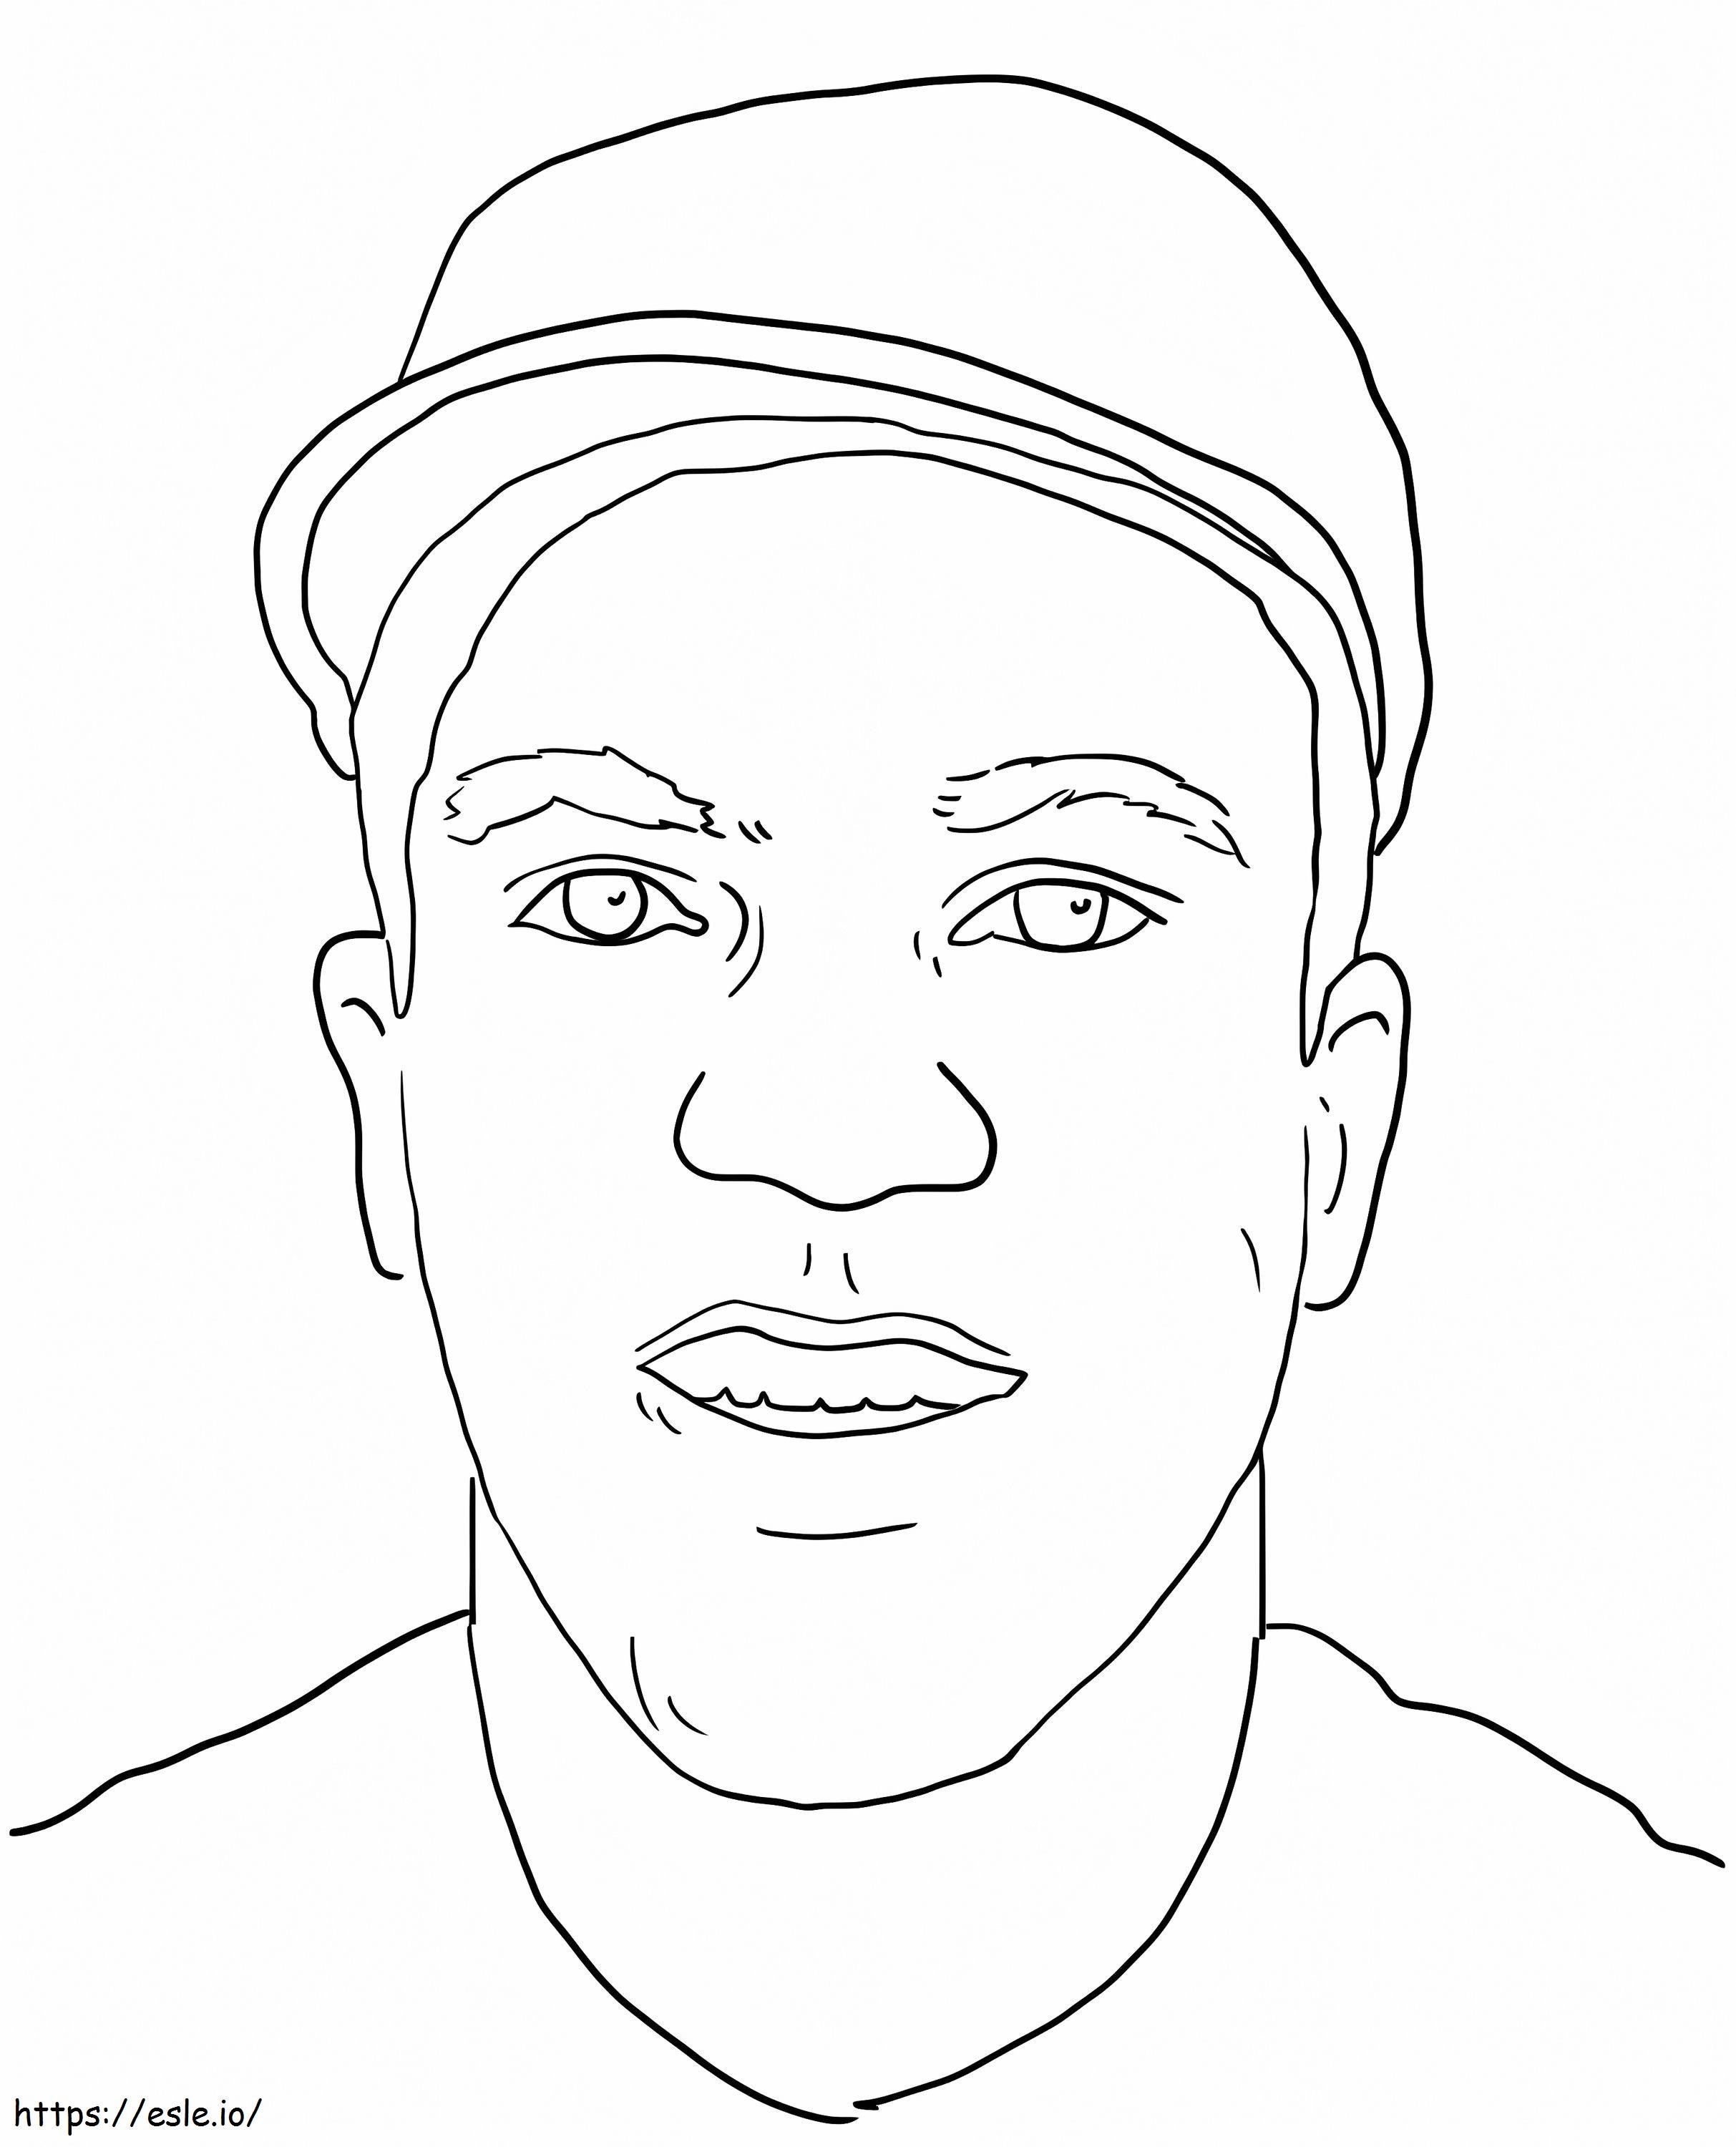 Jackie Robinson 7 coloring page